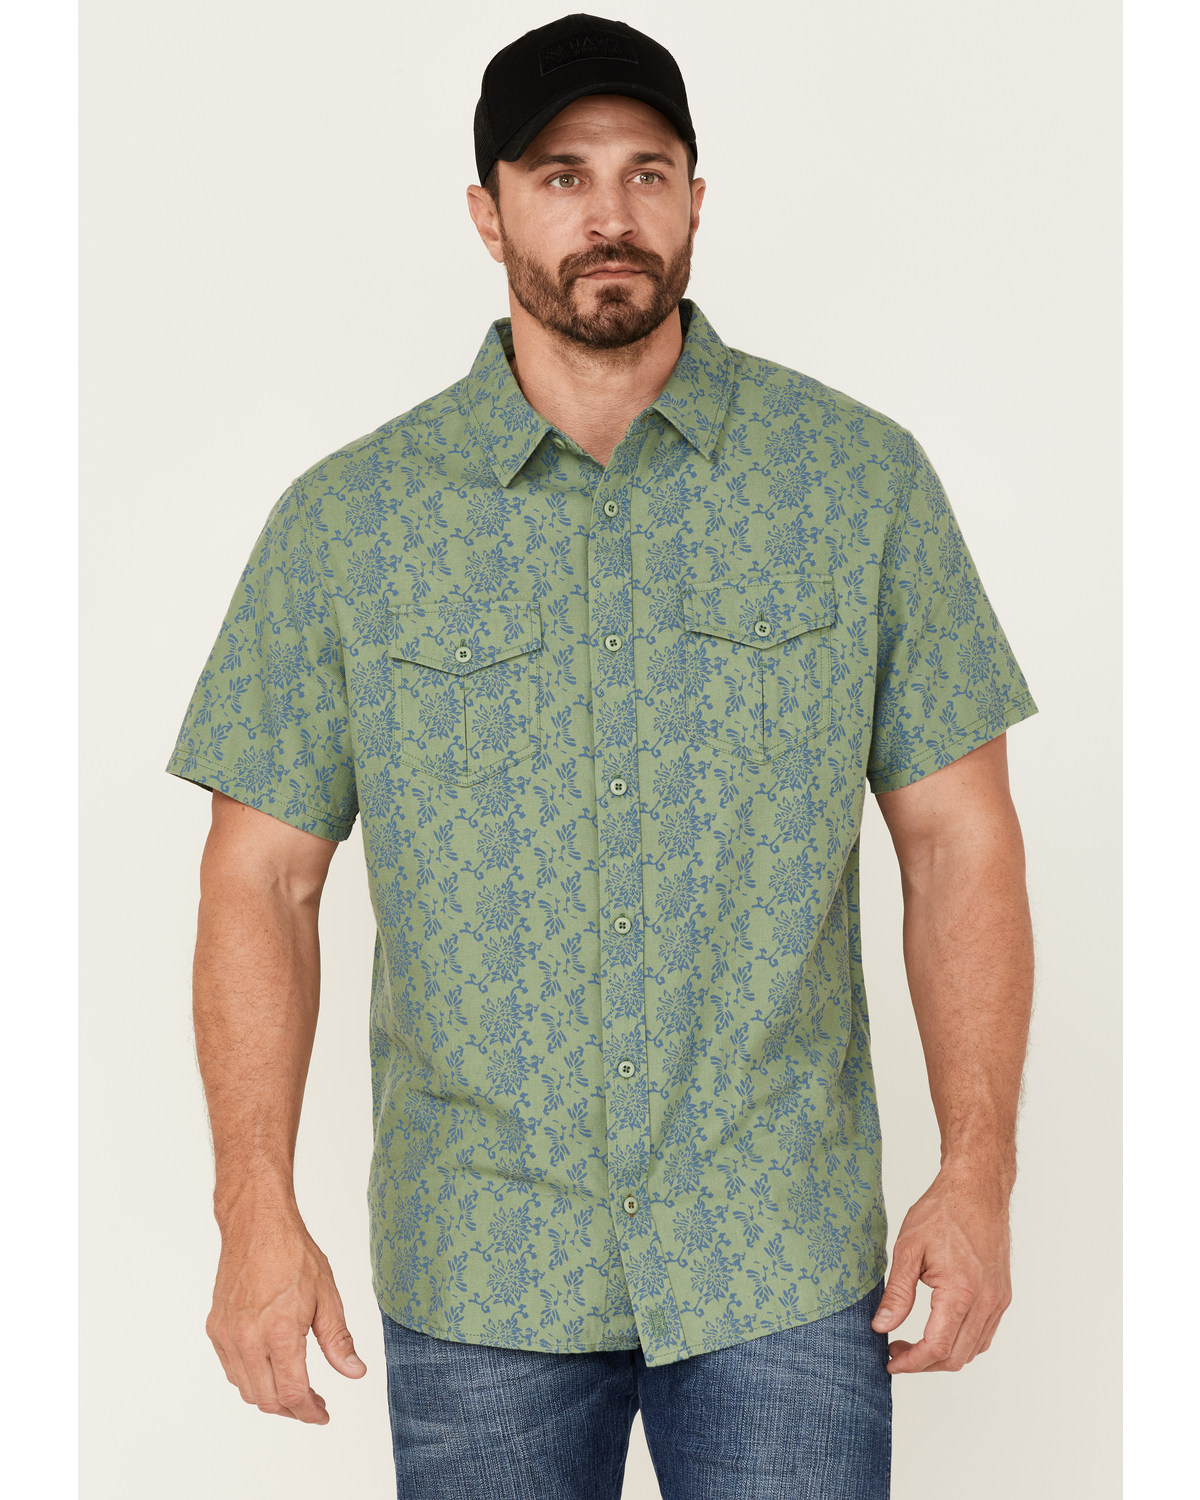 Brothers and Sons Men's Floral Print Short Sleeve Button-Down Western Shirt